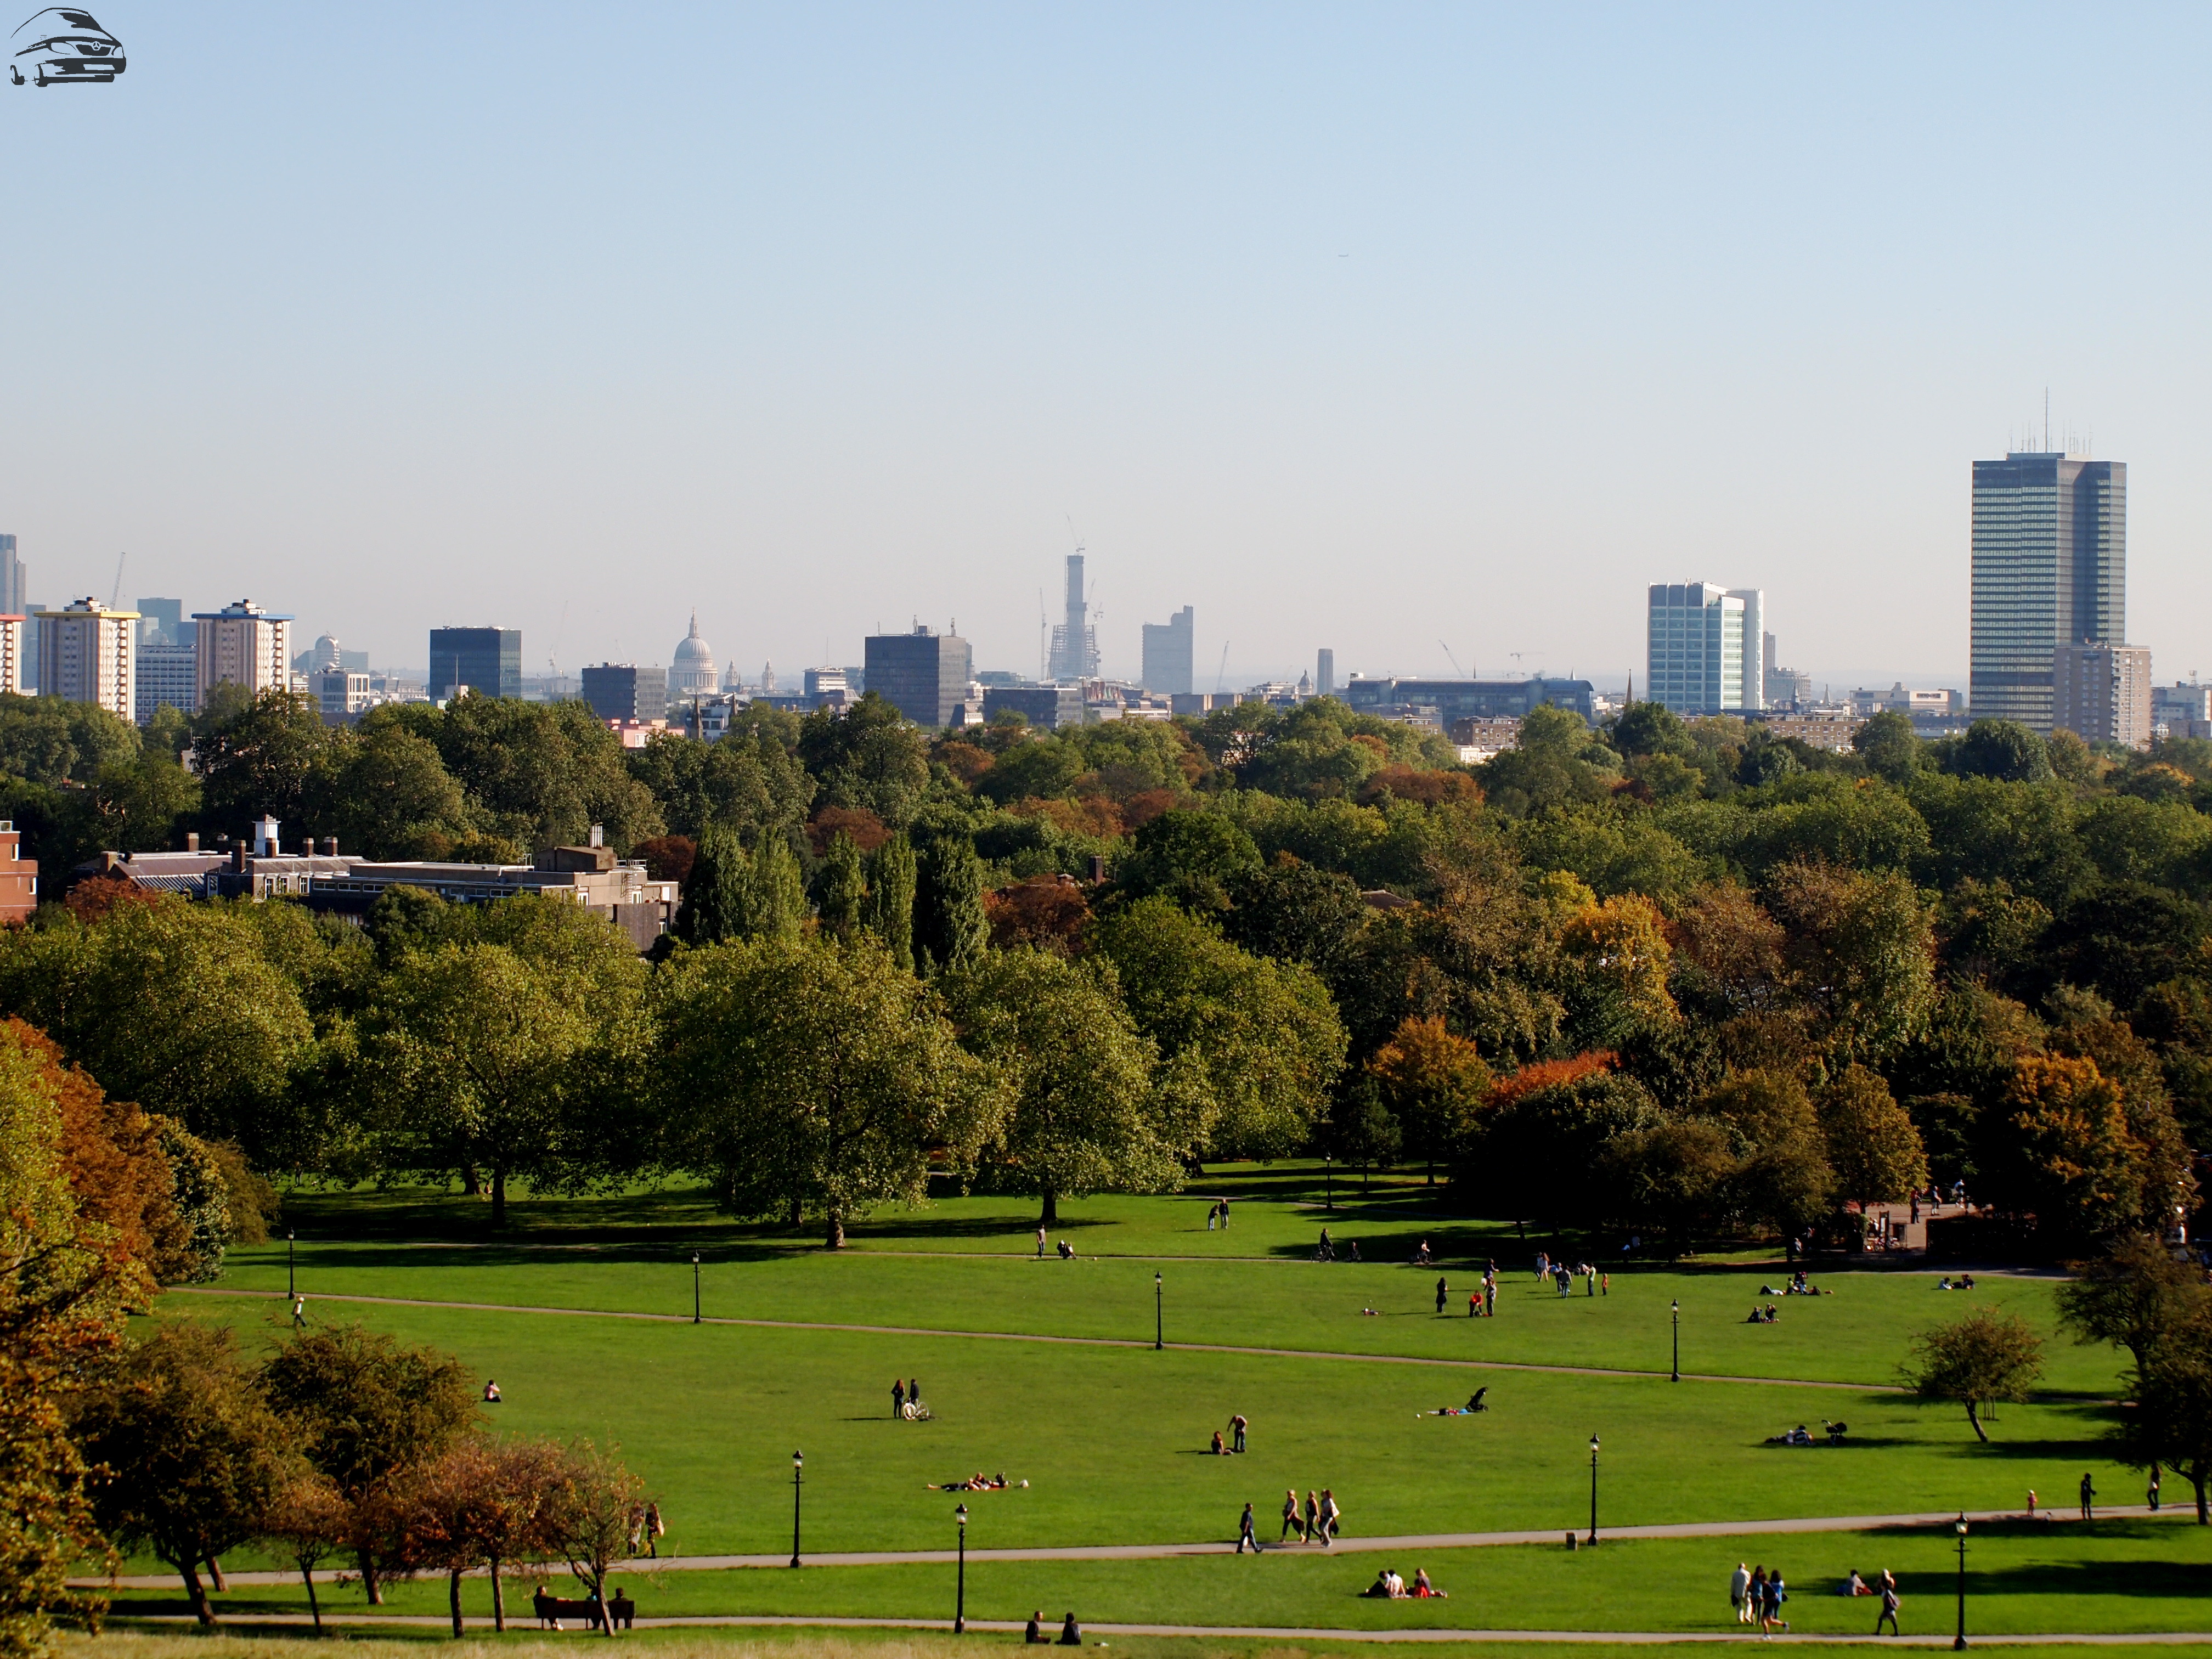 NW1, NW3, NW8 Primrose Hill